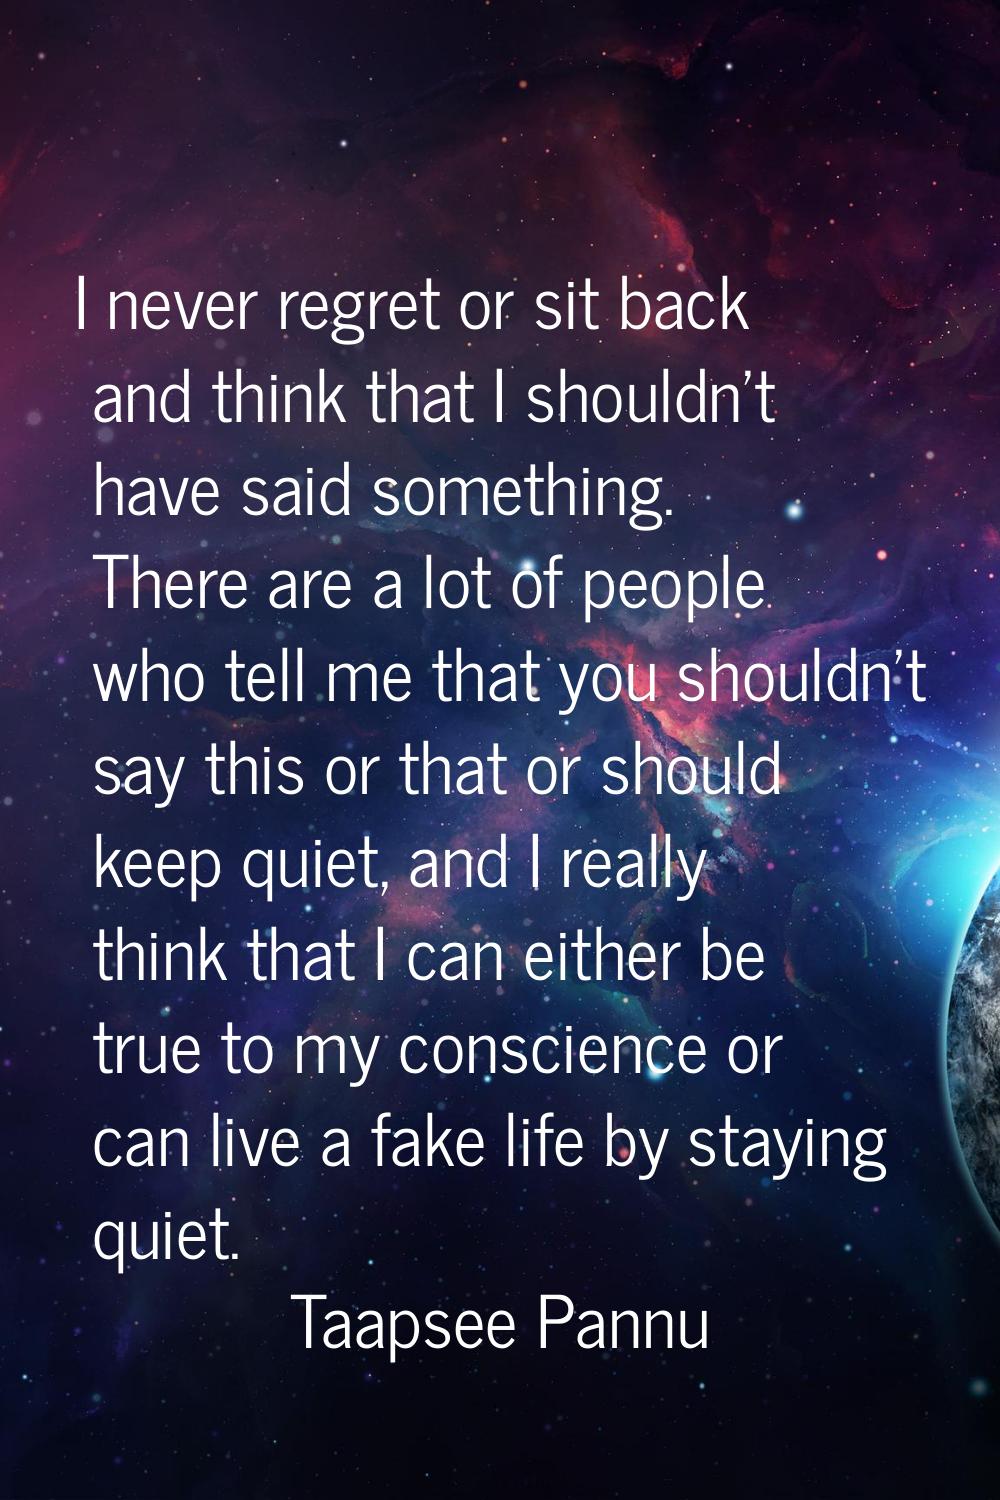 I never regret or sit back and think that I shouldn't have said something. There are a lot of peopl